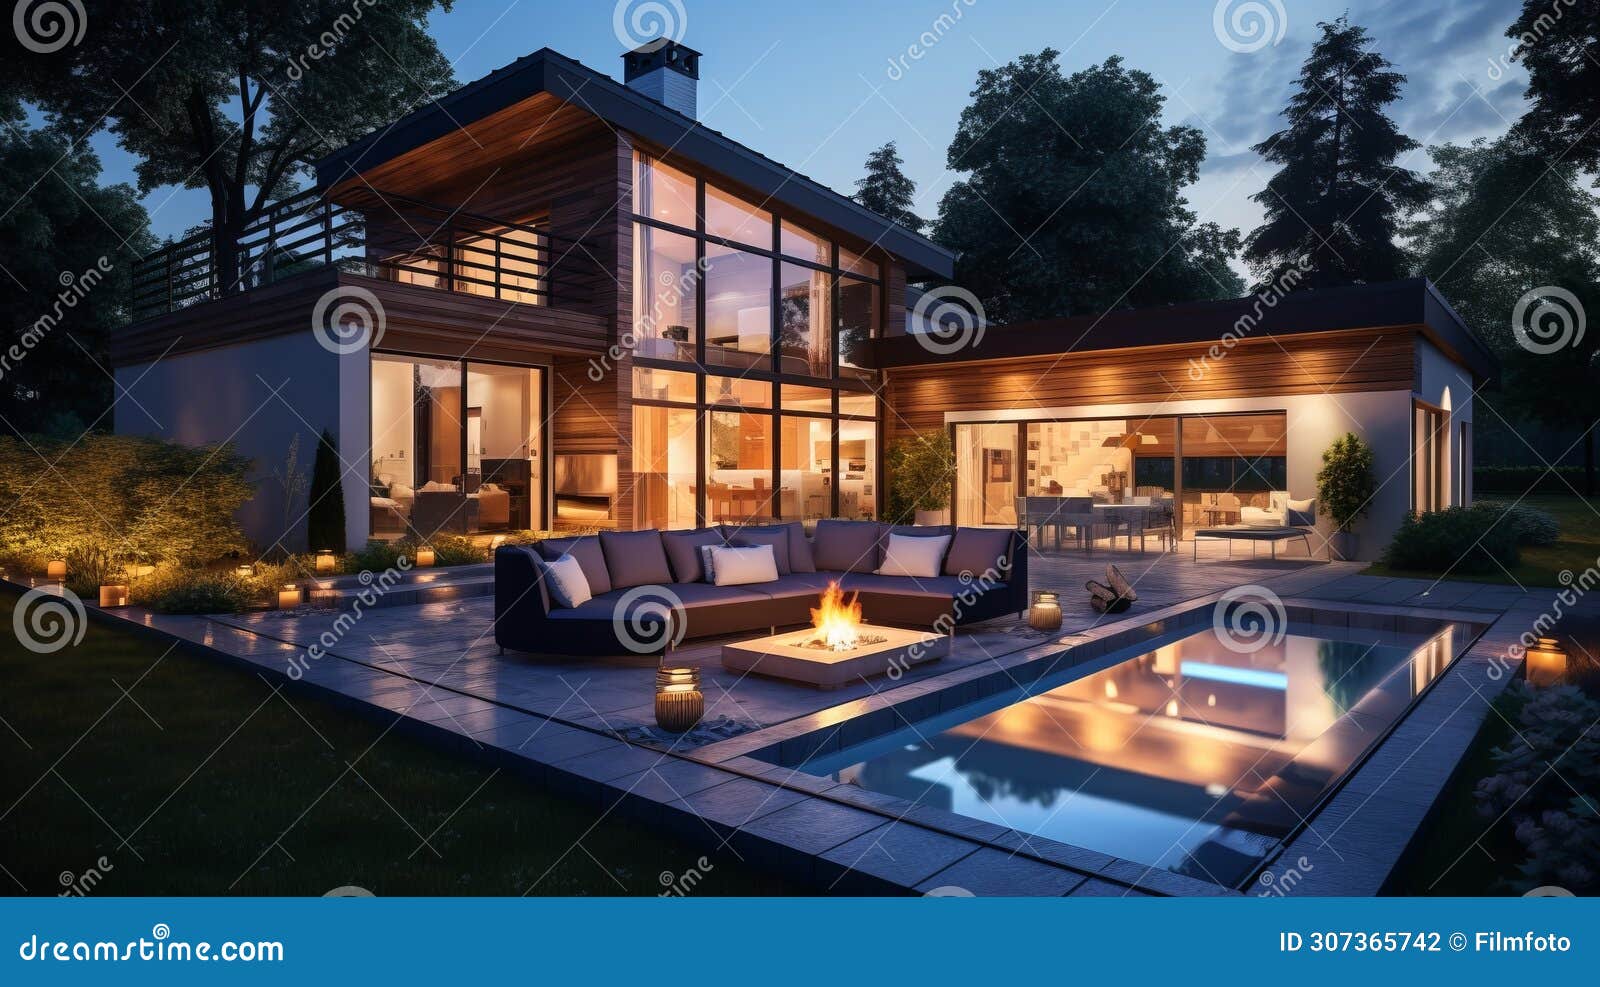 modern residential building with fire place and swimming pool in garden in the evening.